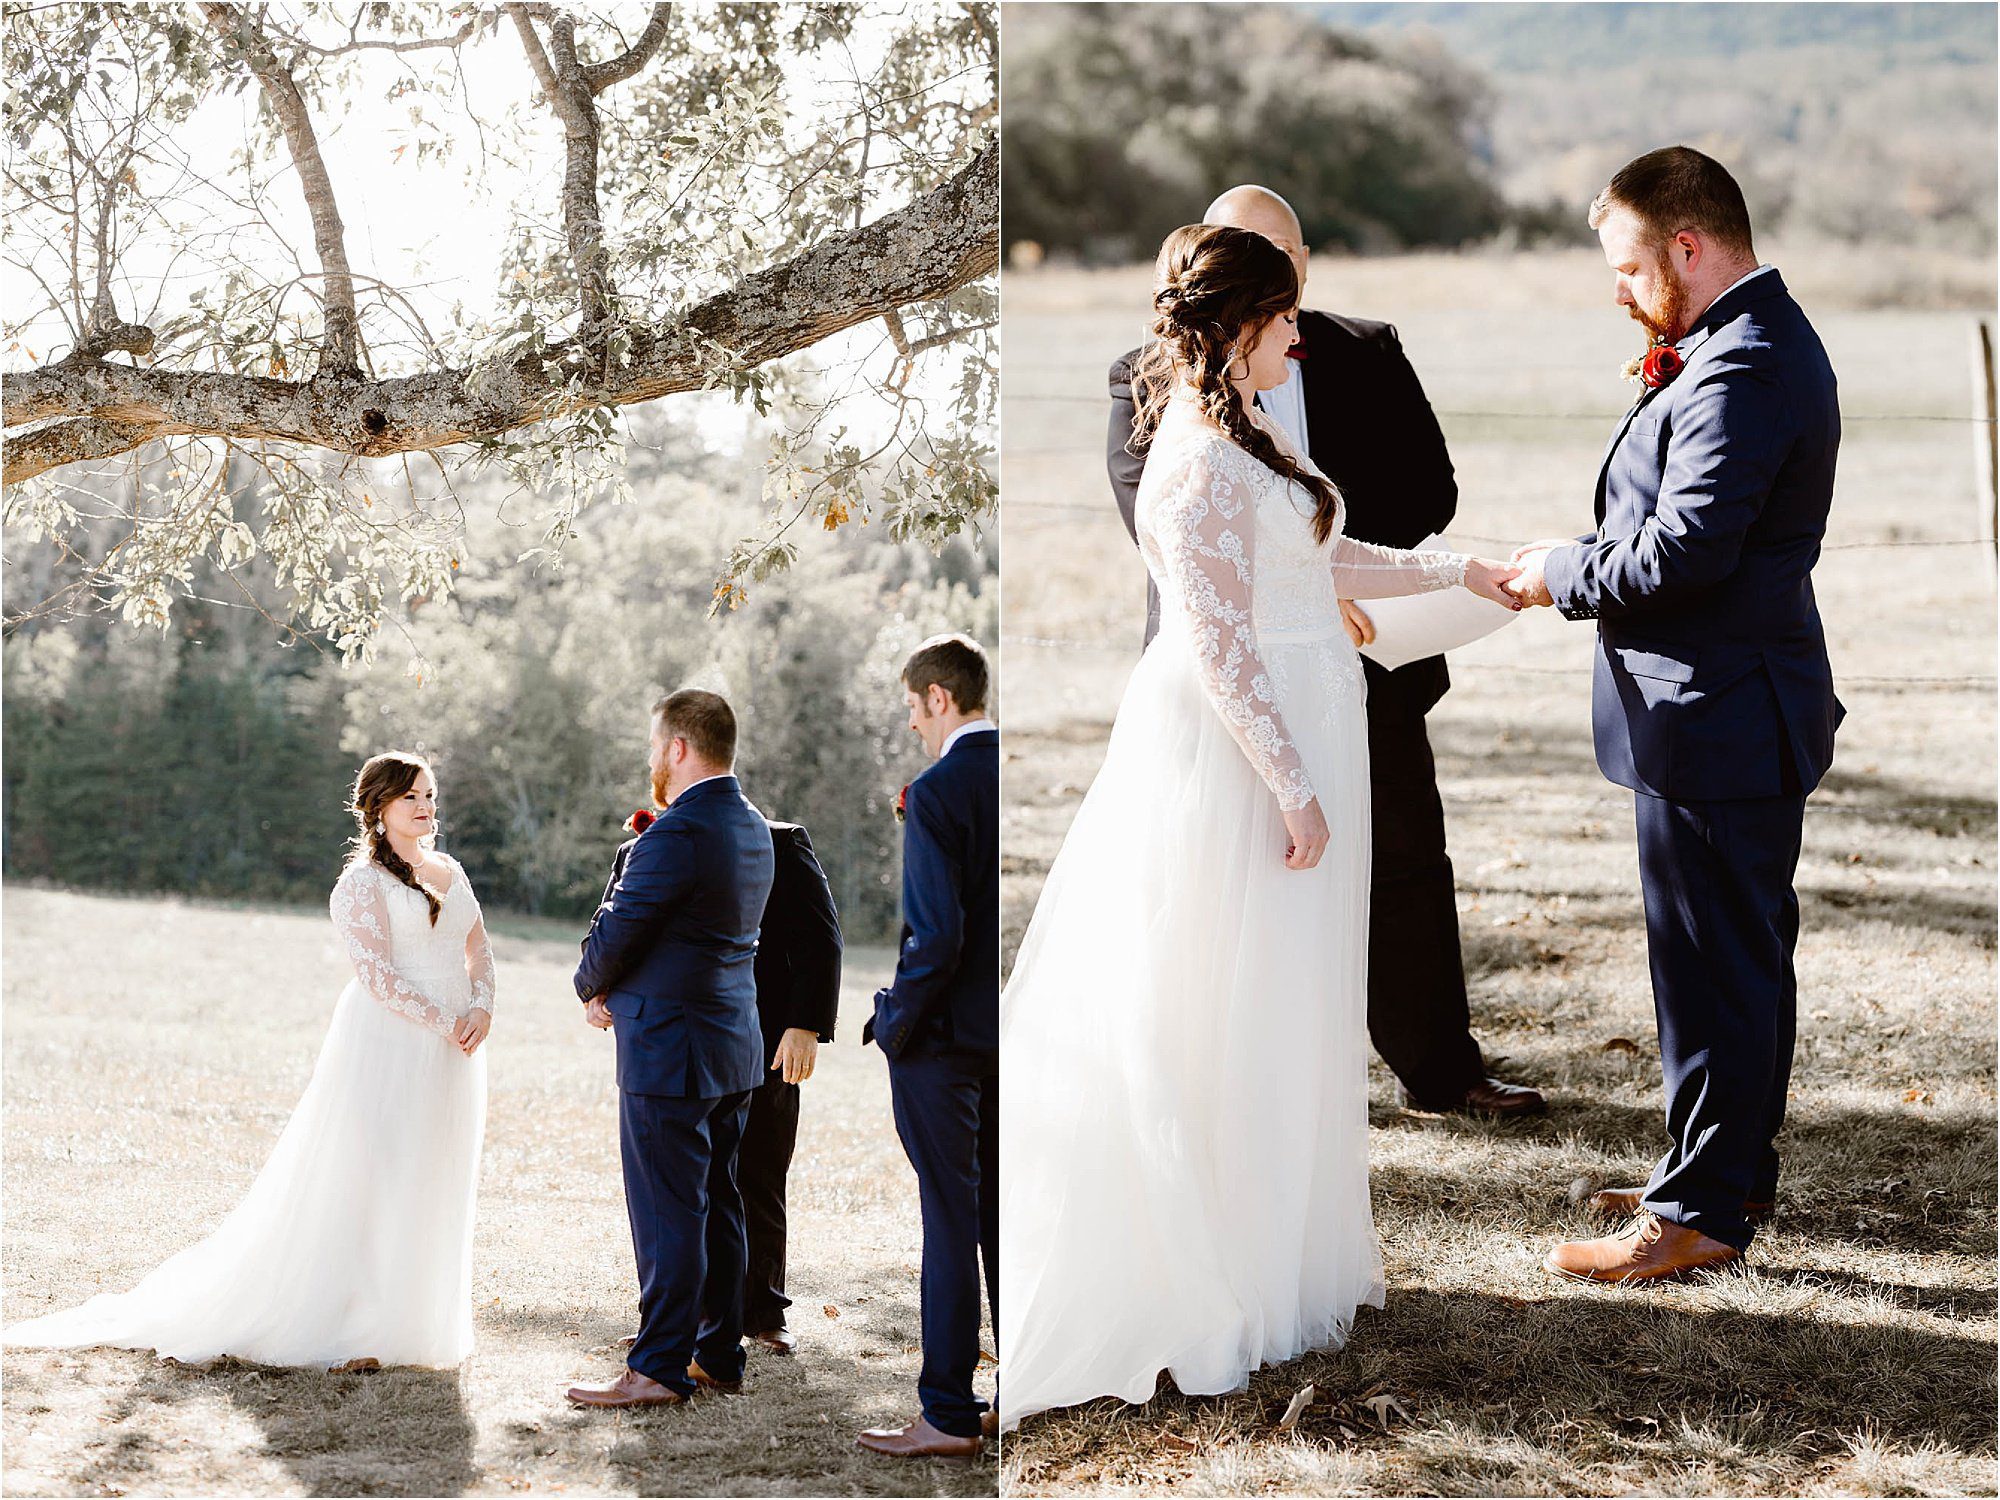 Smokies elopement at LeQuire Cemetery